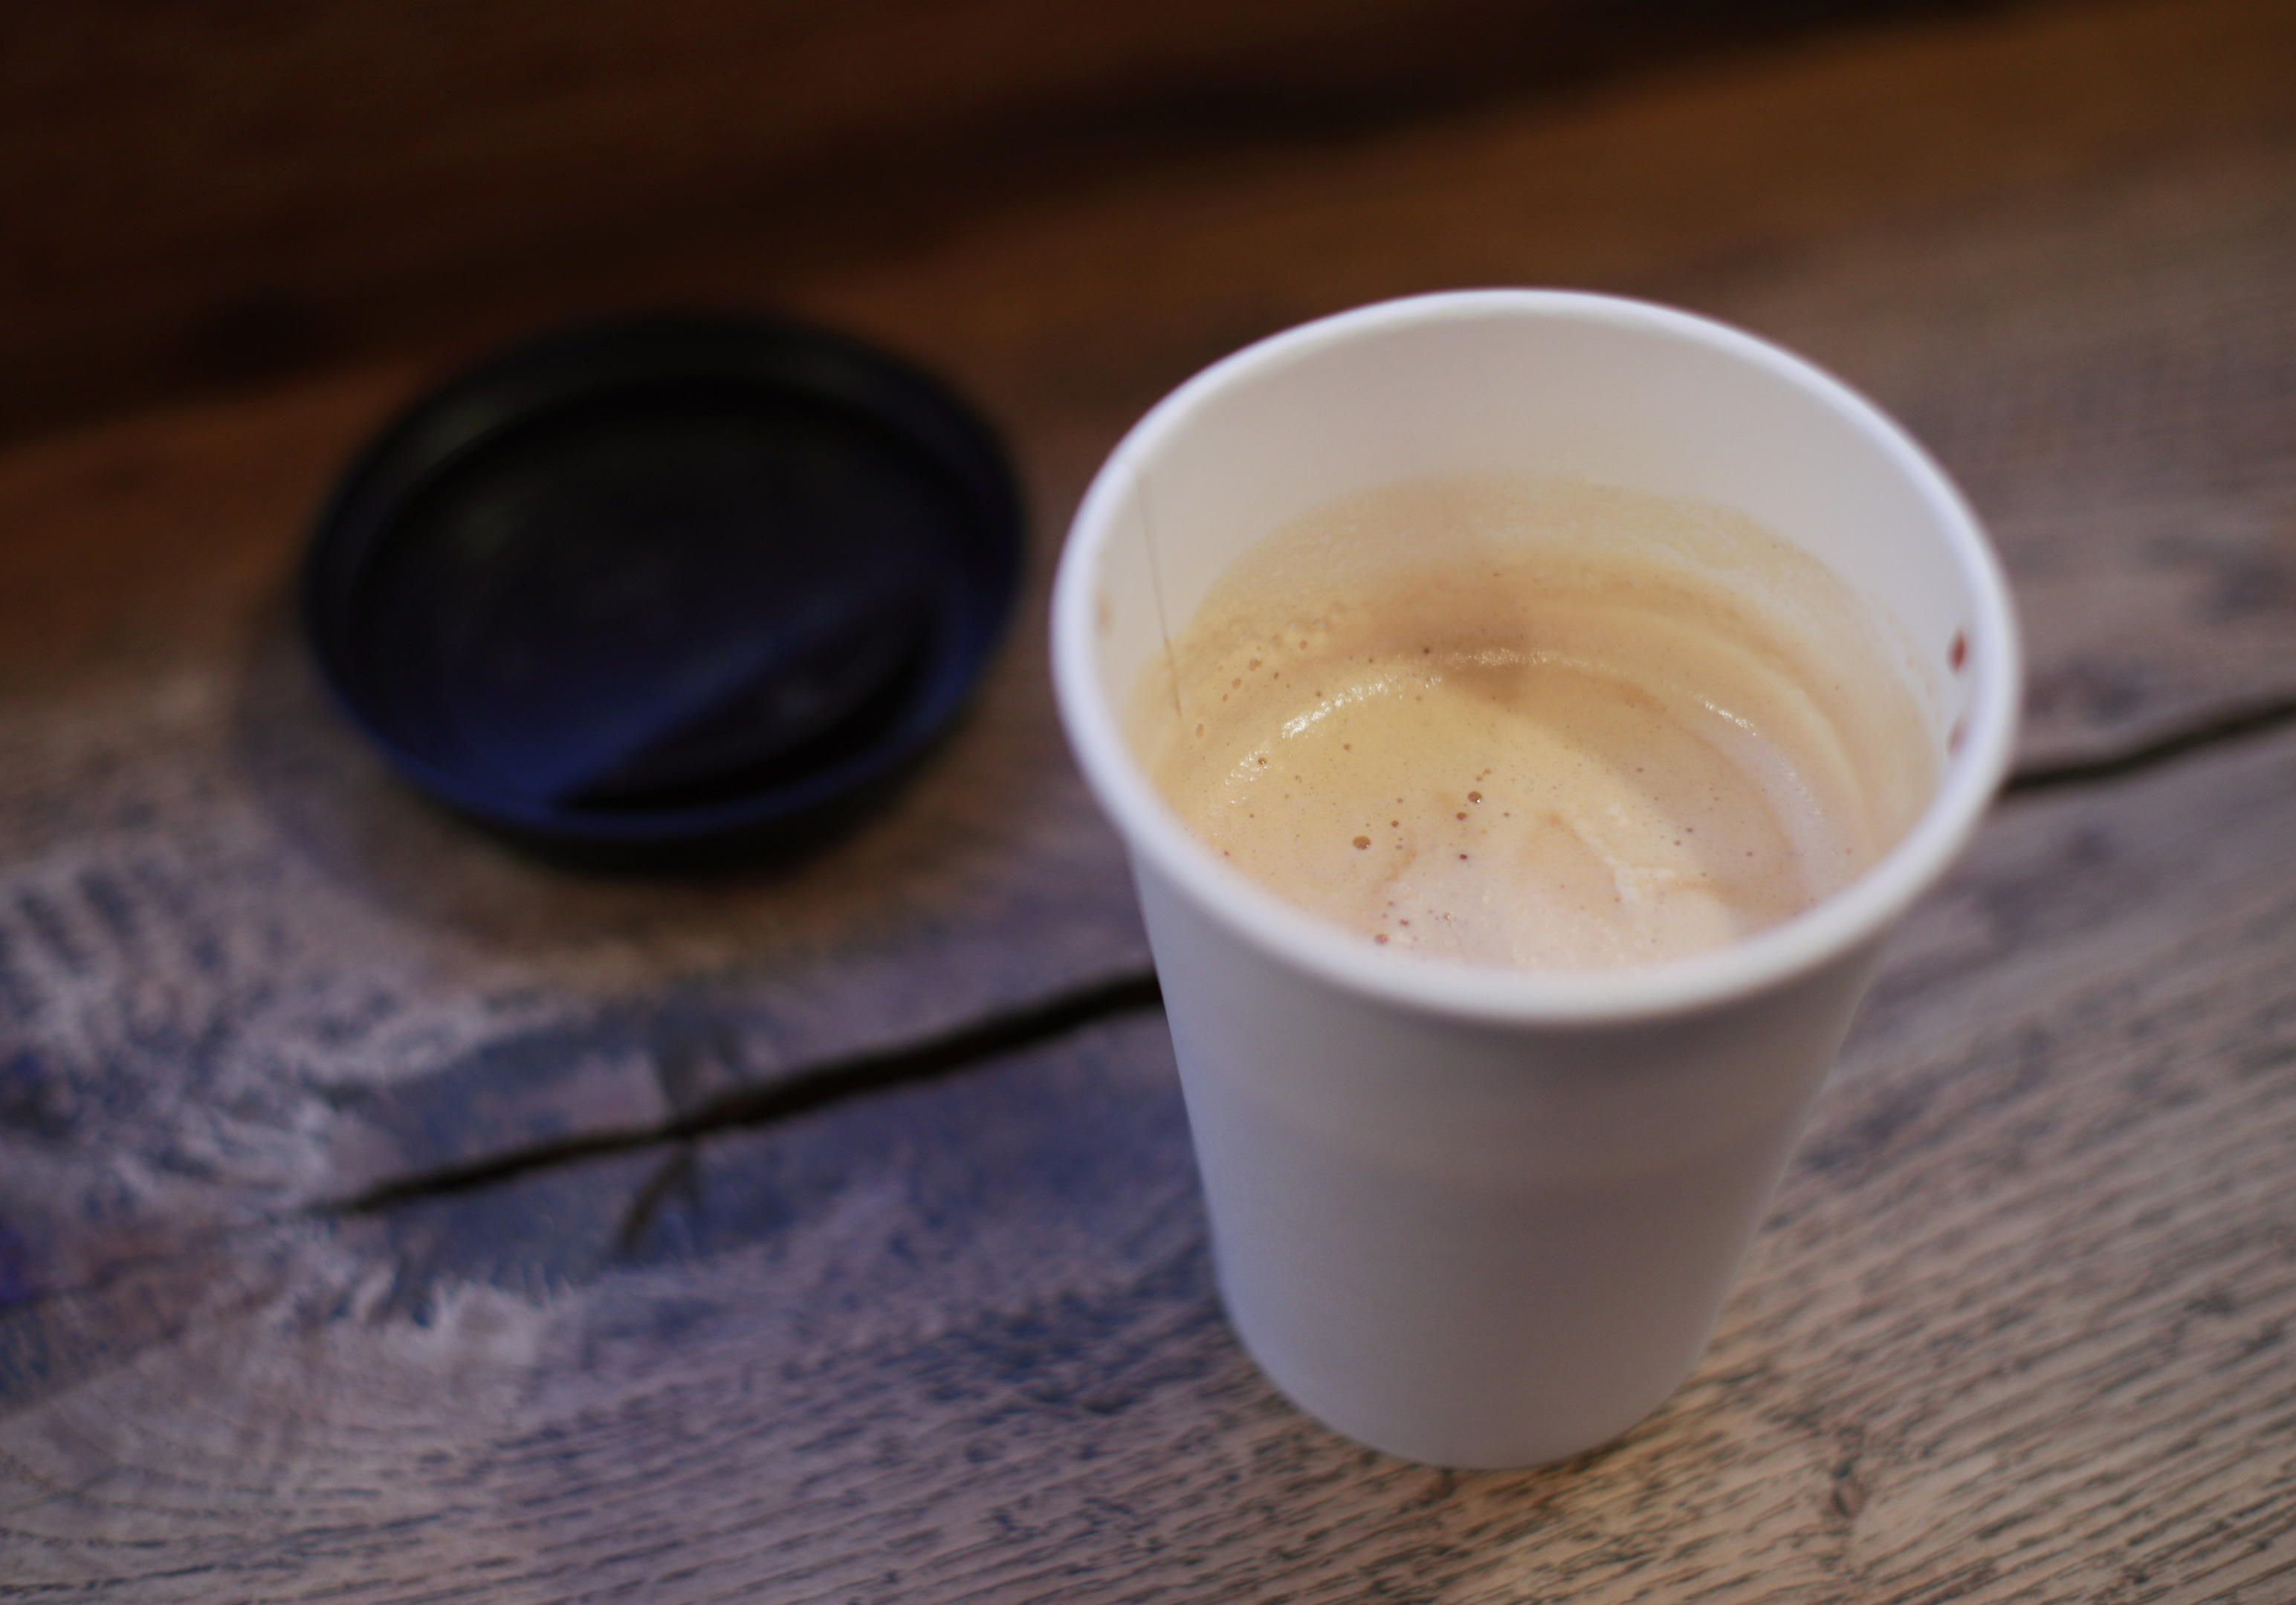 The committee is calling on the Government to introduce a 25p charge on disposable cups on top of the price of a coffee, with the money raised used to improve the UK's reprocessing facilities and "binfrastructure" to ensure cups and other food and drink packaging is recycled. (Yui Mok/PA Wire)